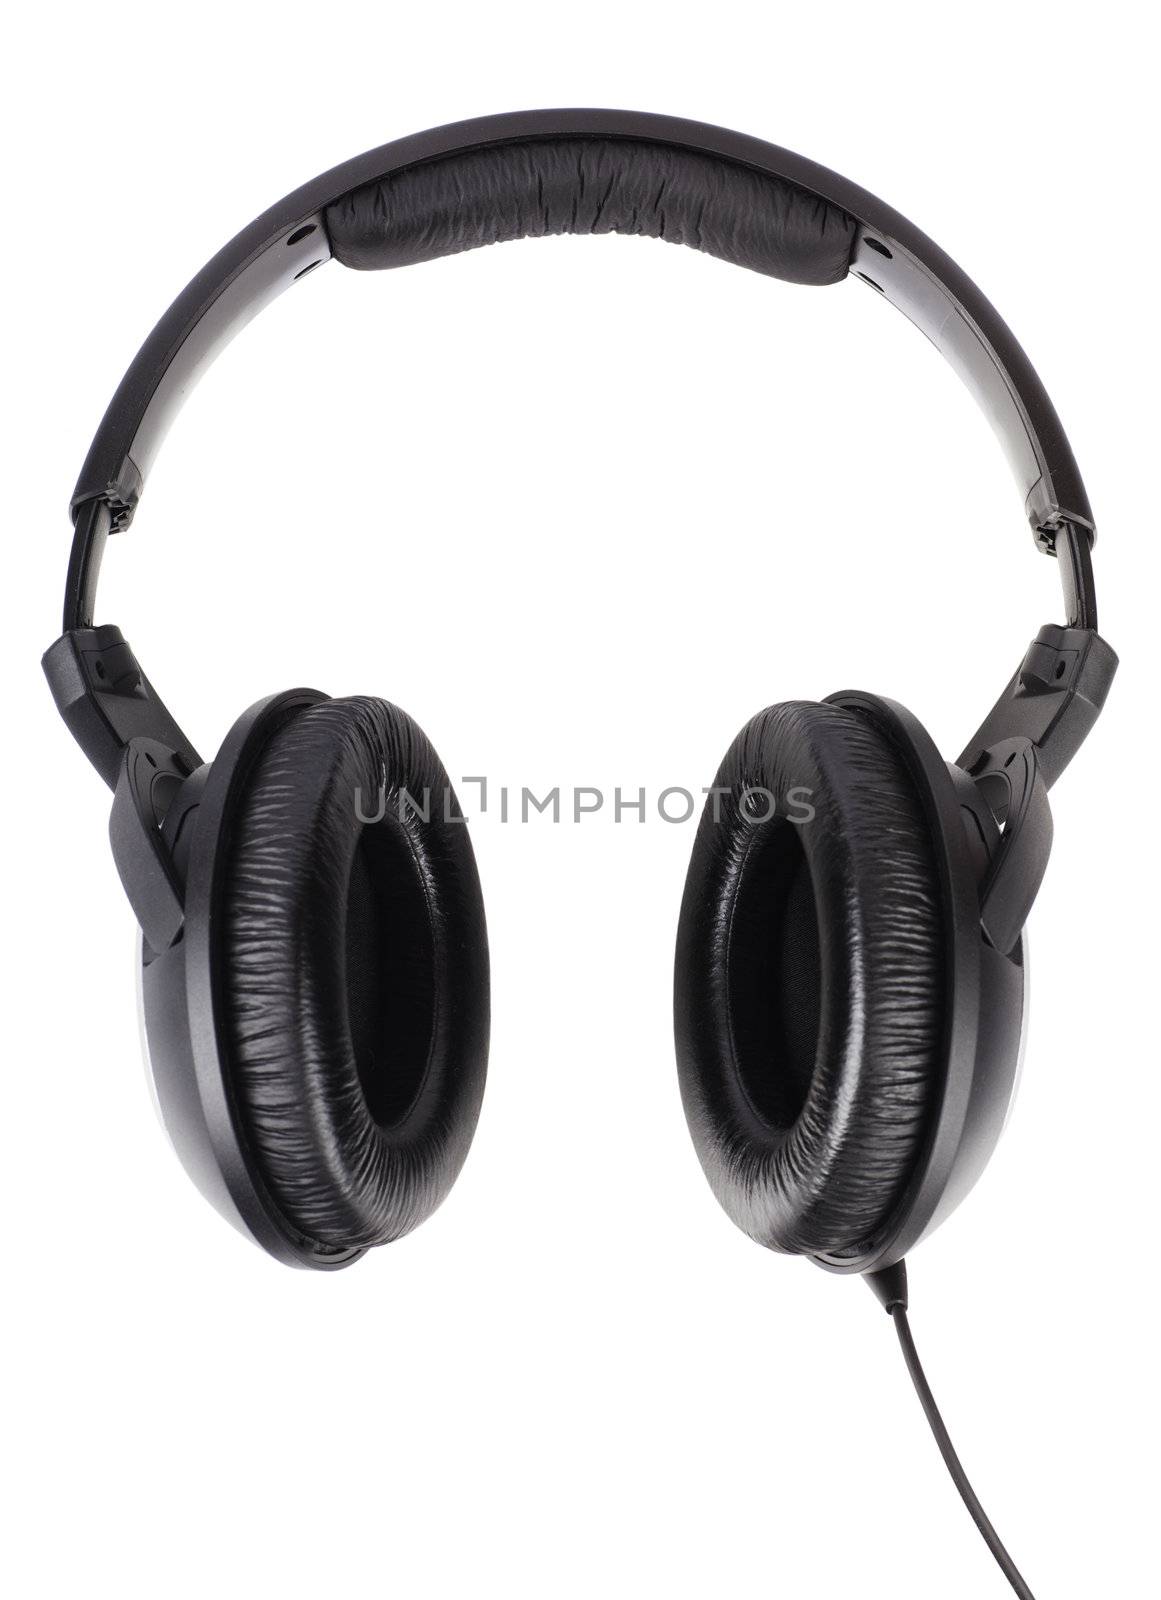 Professional headphones isolated over white background